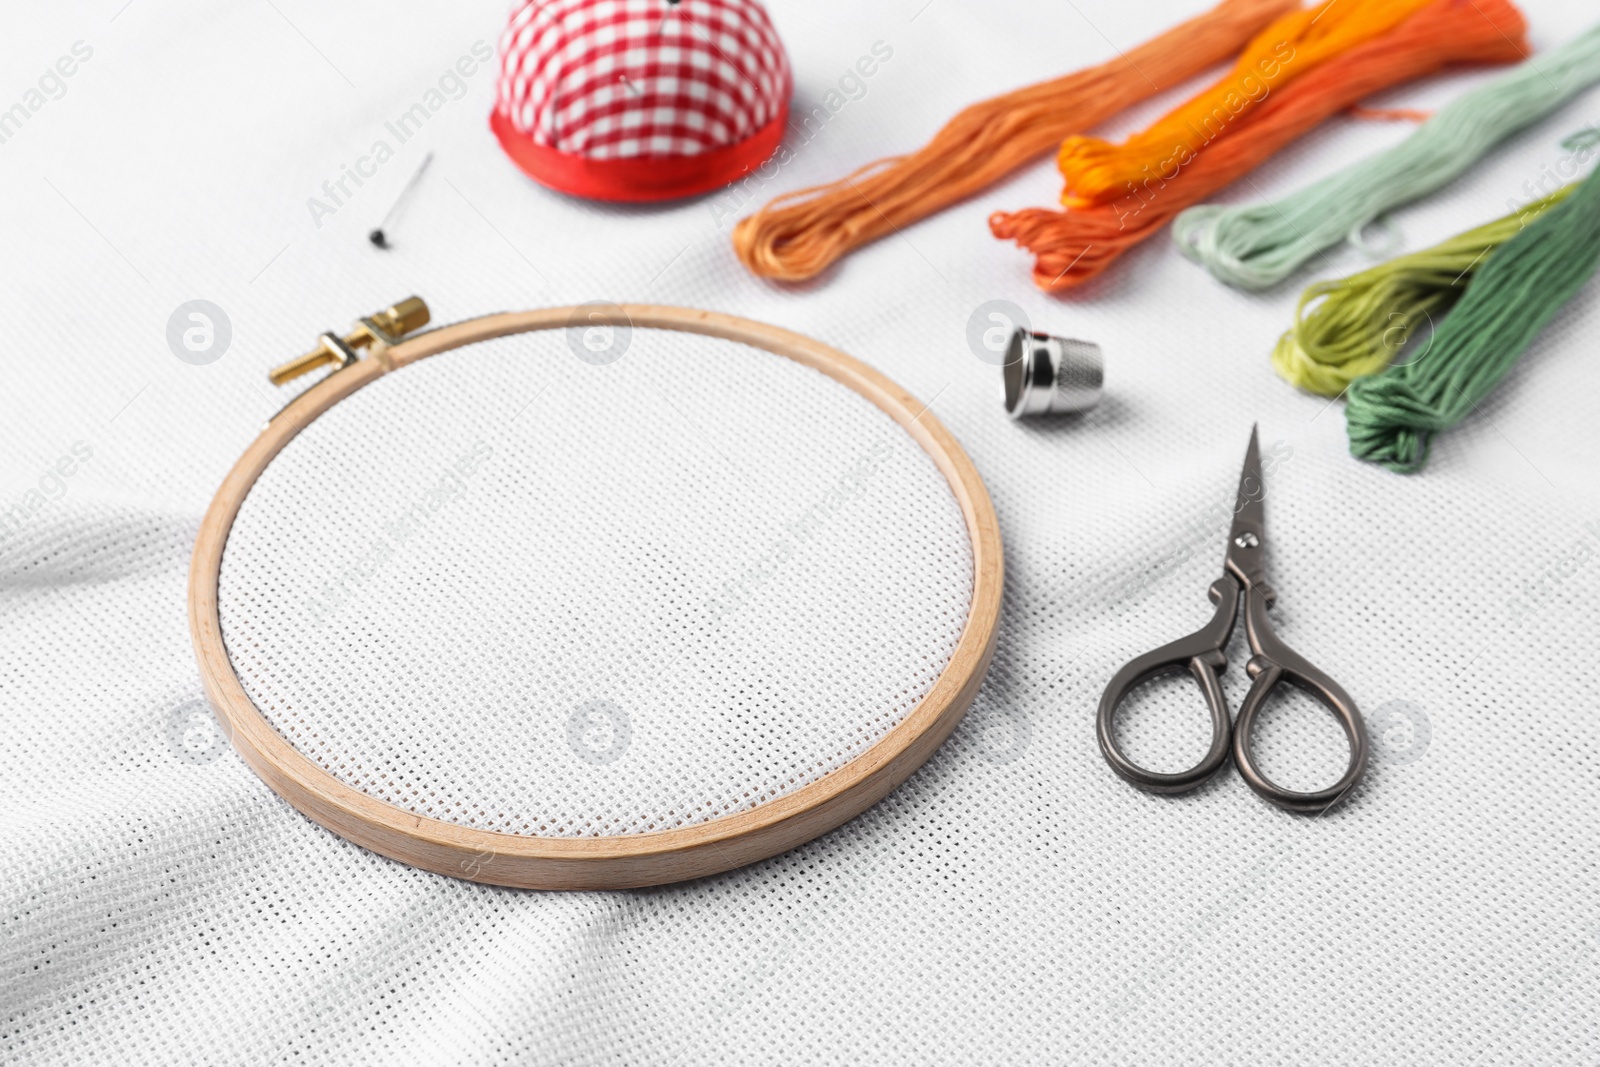 Photo of Embroidery hoop with white fabric and other accessories